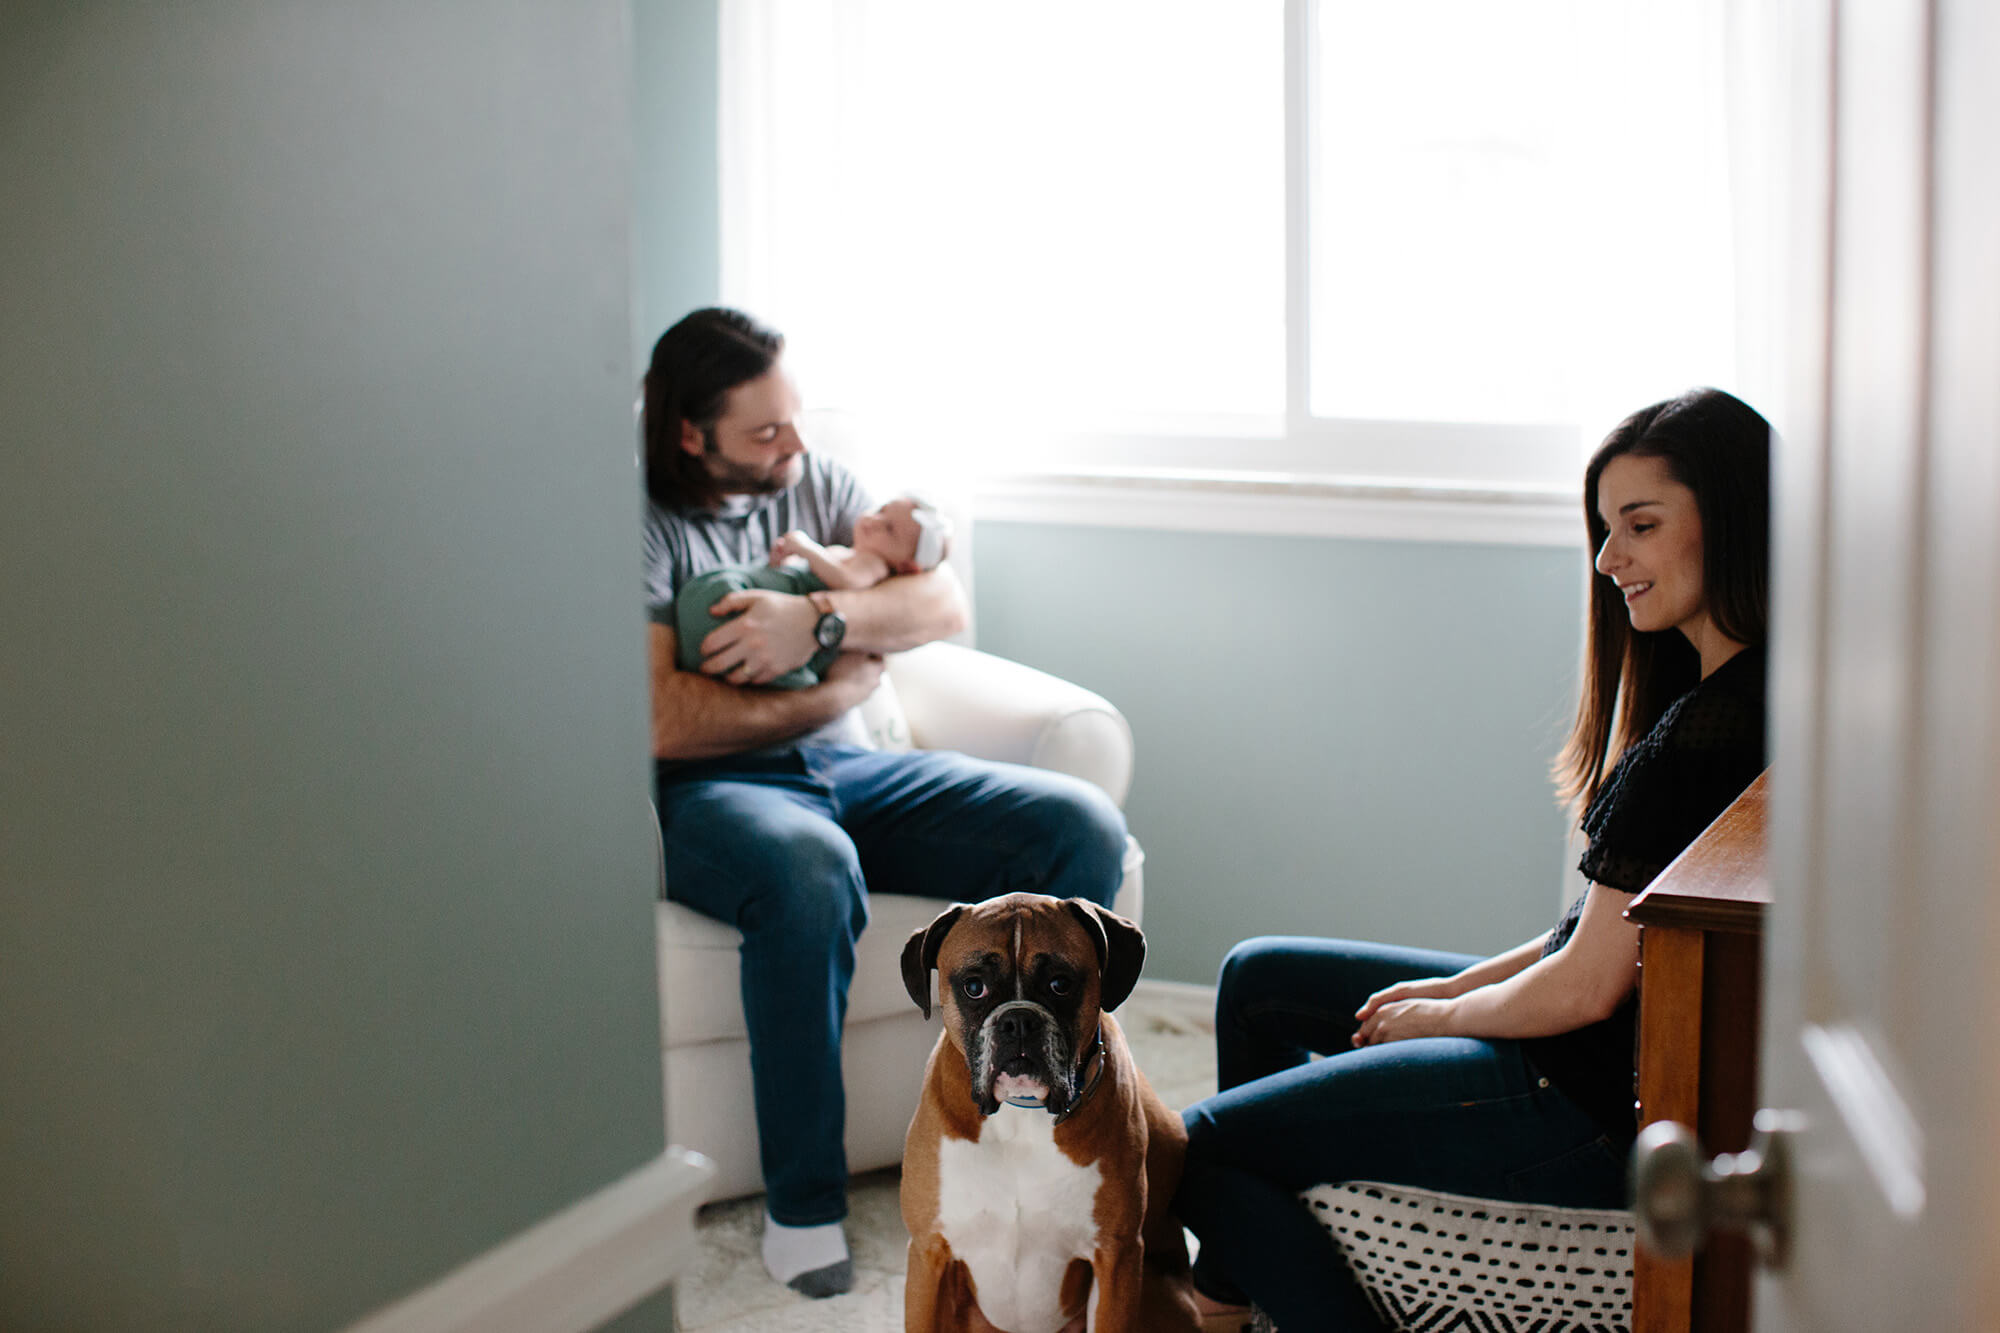 in home newborn photography by Angie Menos - mom, dad and dog with new baby at home